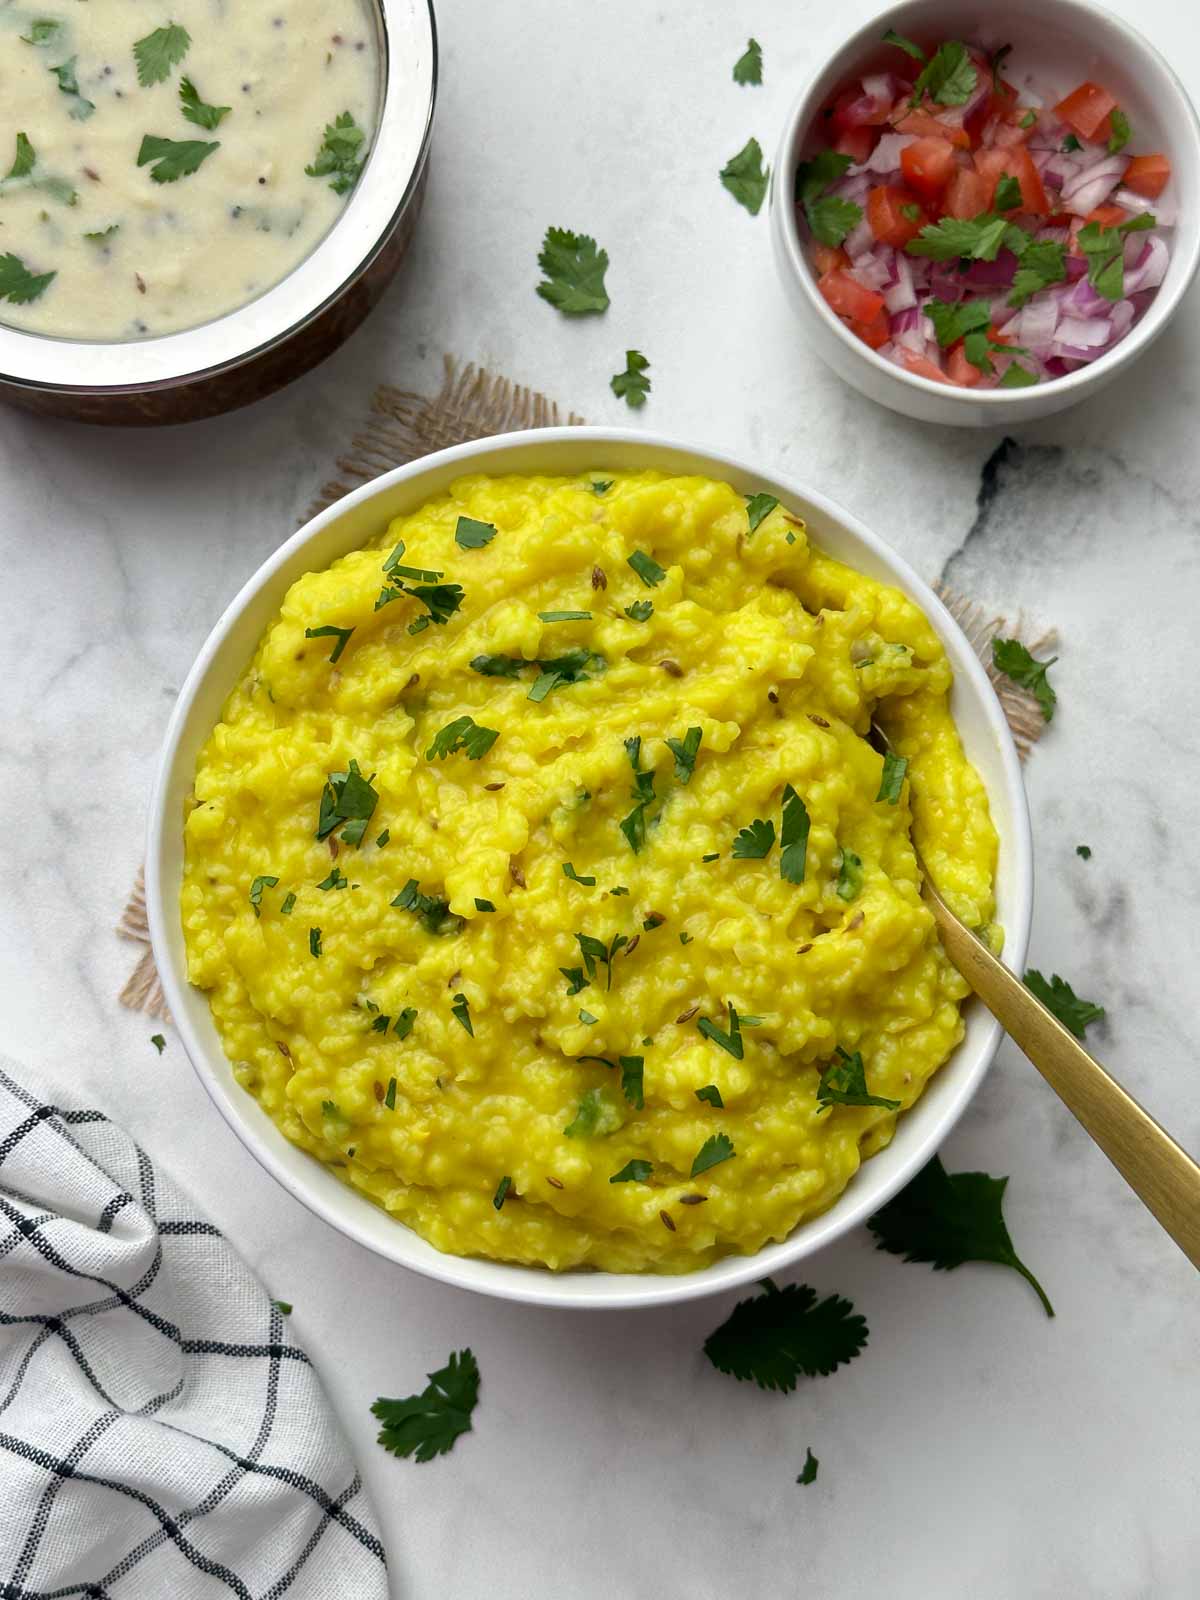 moong dal khichdi served in a bowl with a spoon and kadhi and salad on the side